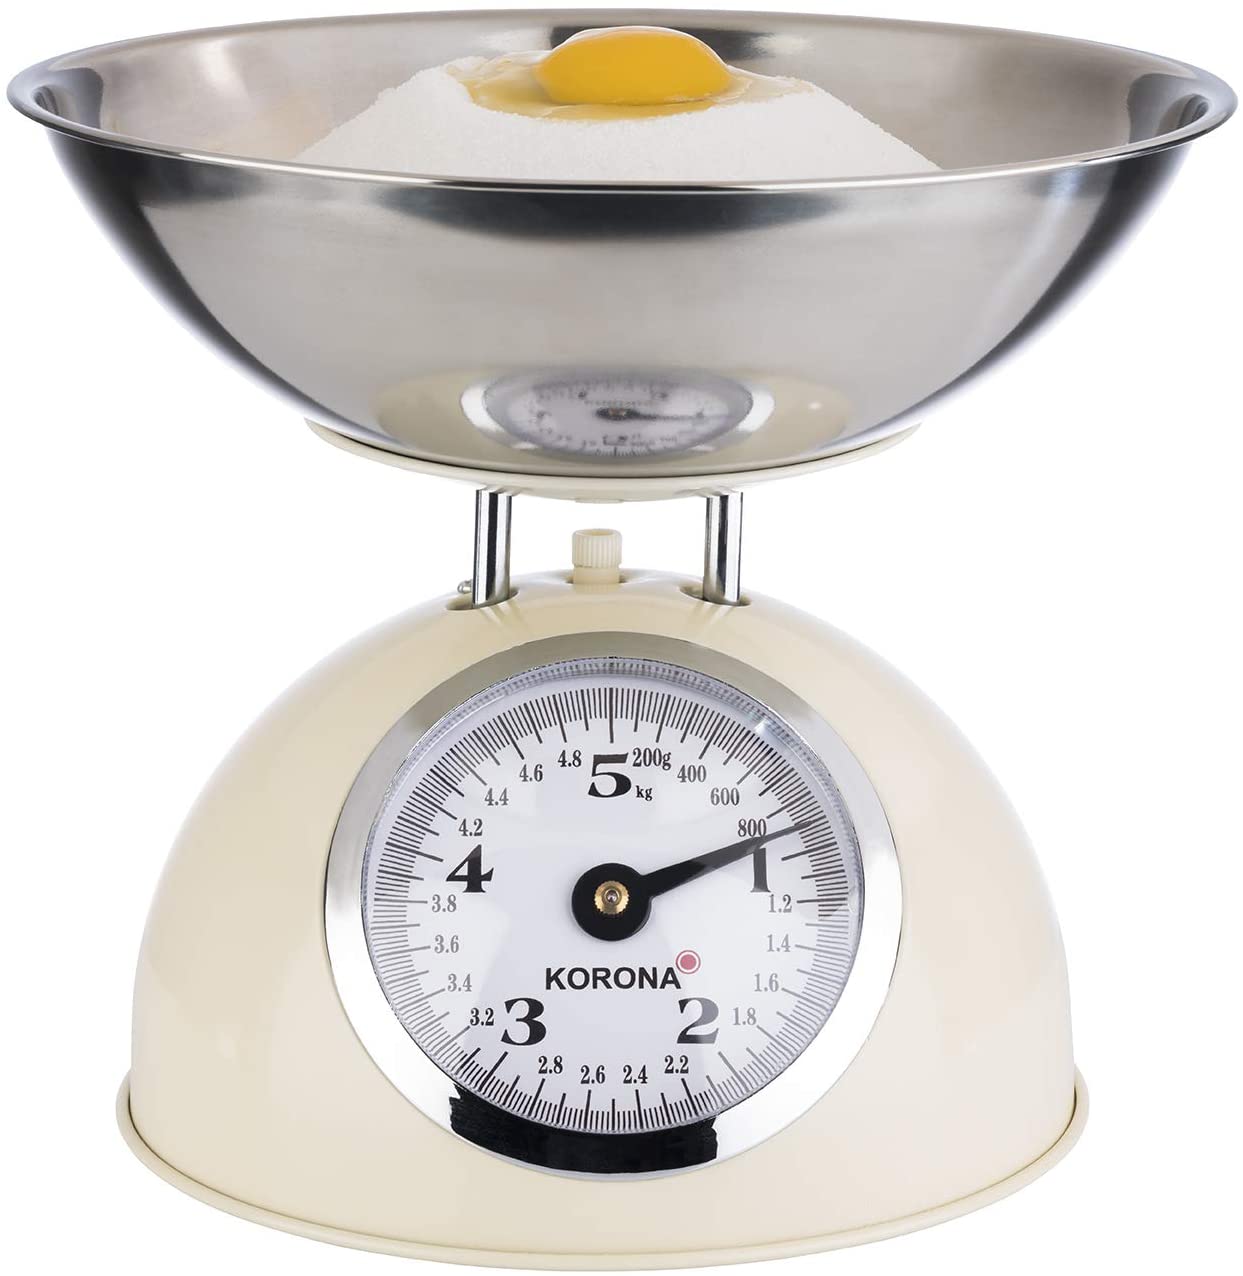 Korona Paul 76151 Retro Kitchen Scales Maximum Load 5 kg Division 20 g Includes Stainless Steel Weighing Bowl Tare Function Large Full View Scale